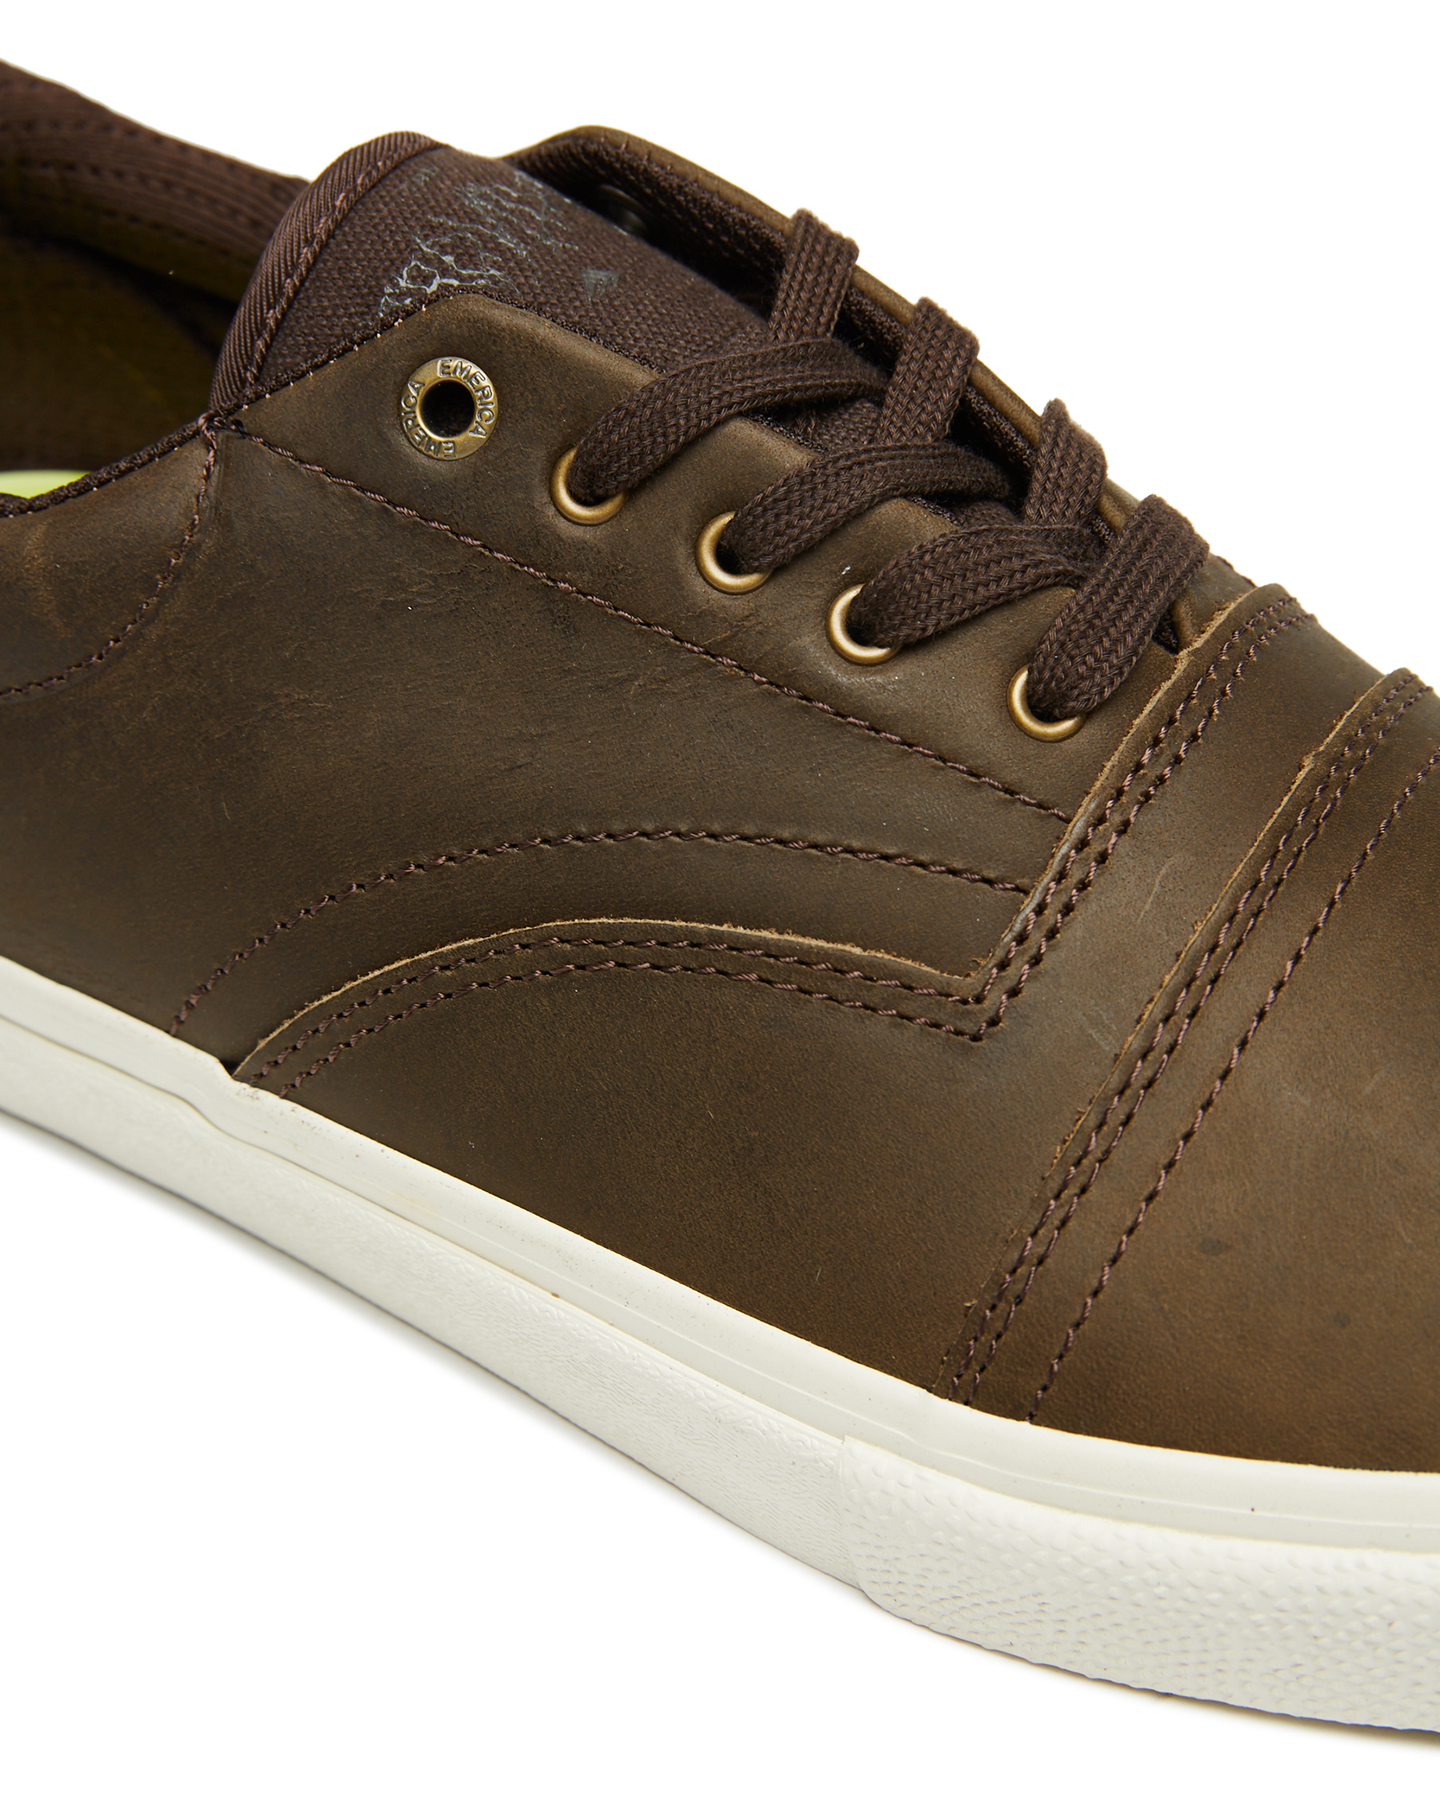 Emerica The Provider Shoe - Brown | SurfStitch